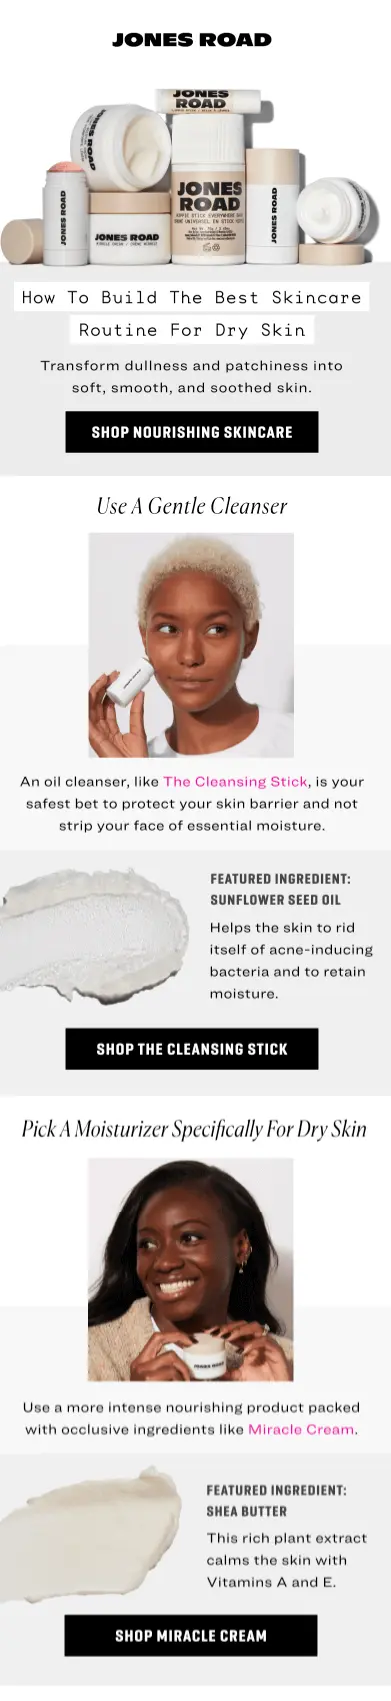 Image shows a marketing email from Jones Road Beauty that follows several CTA hierarchy best practices.